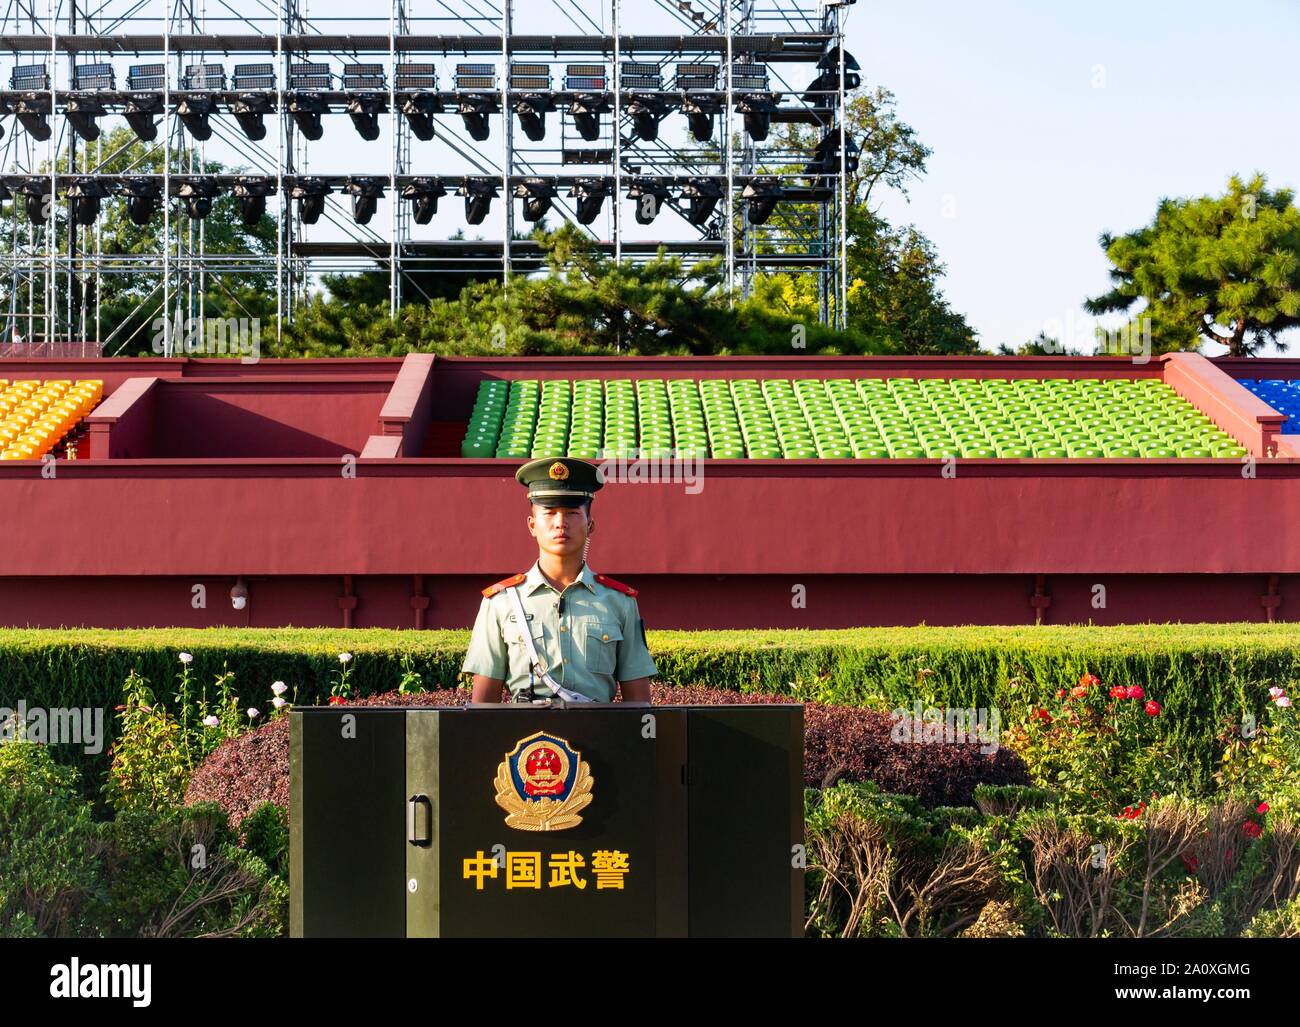 70th anniversary celebration of Declaration of People’s Republic of China on October 1st 2019, Tiananmen Square, Beijing, China with guard soldier Stock Photo